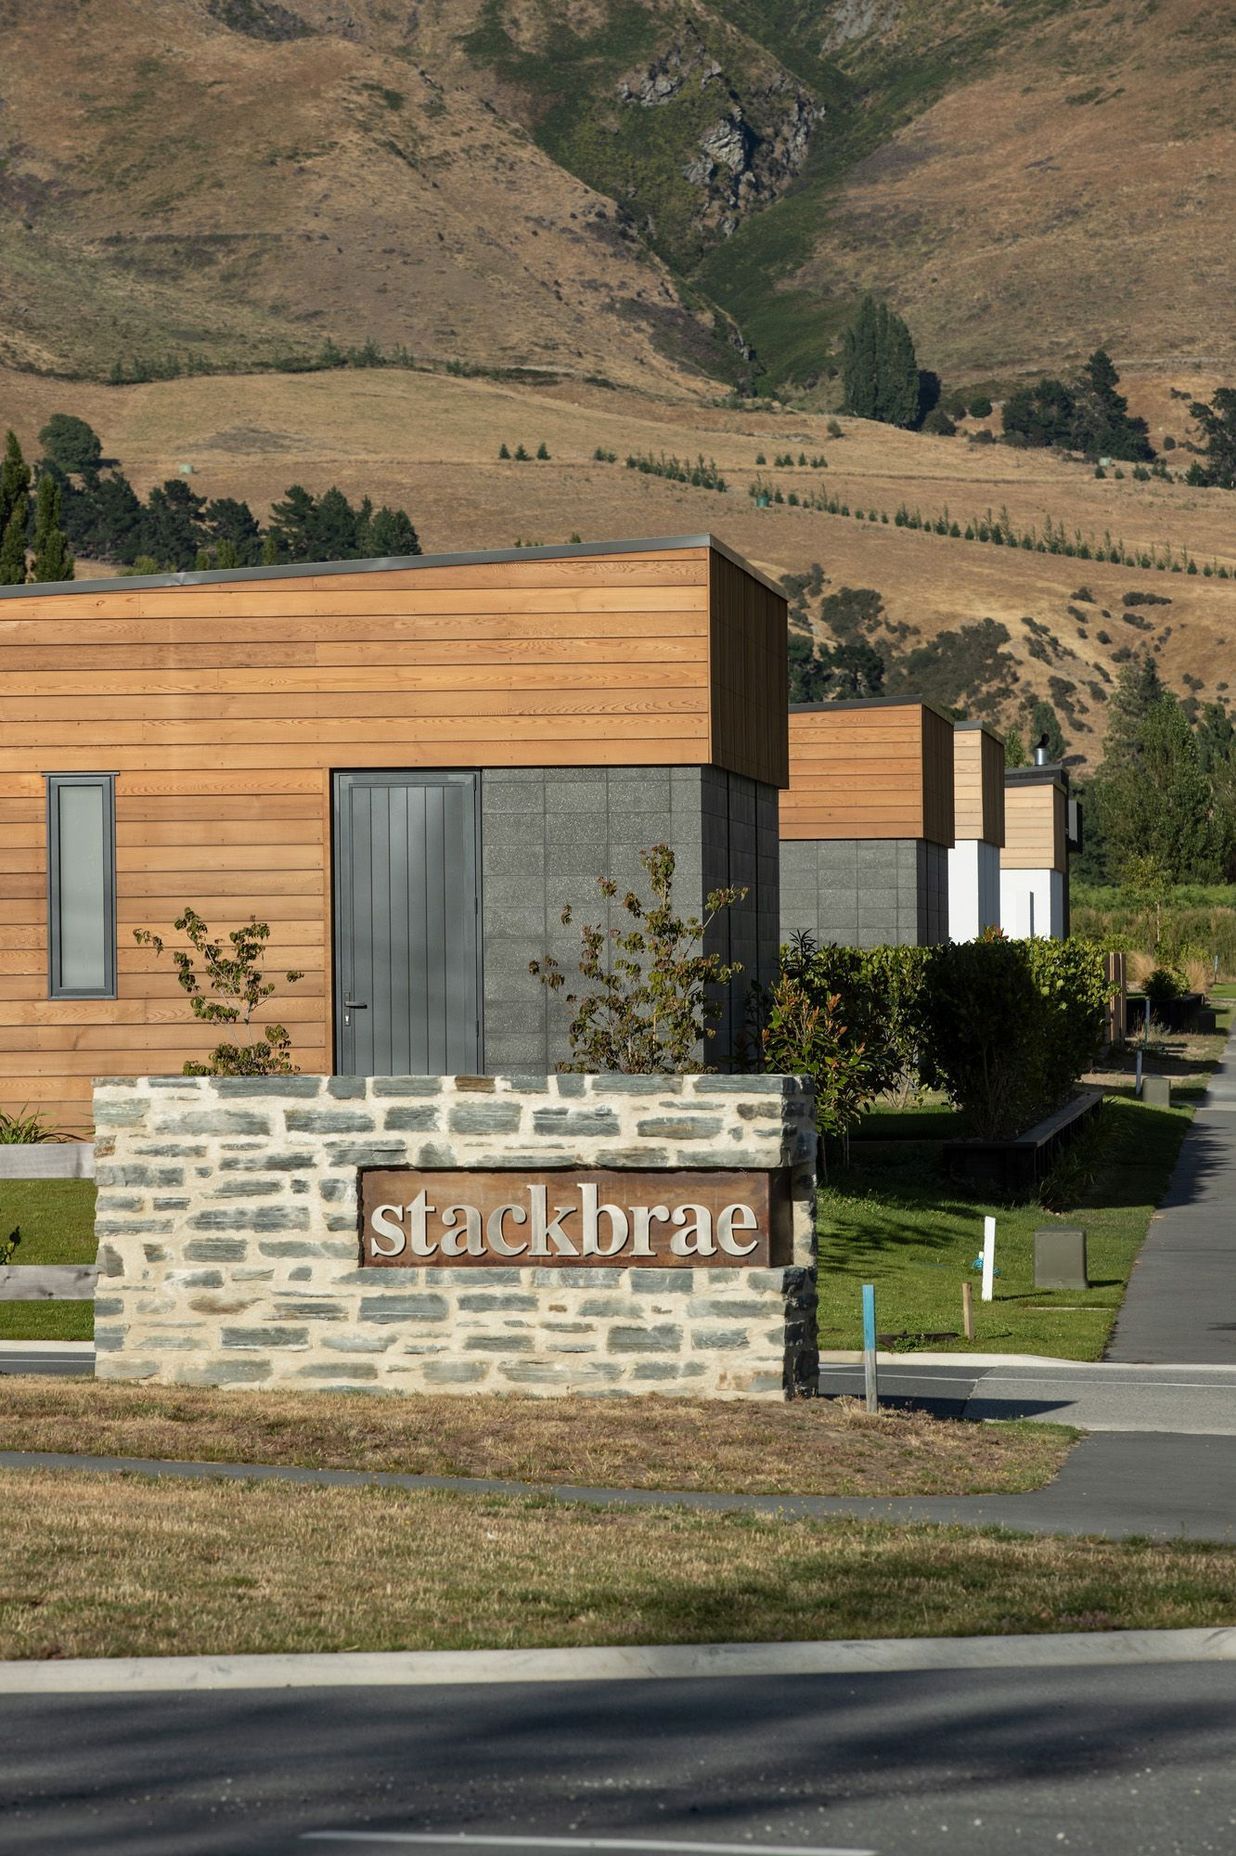 The entrance to the Stackbrae housing development in Wanaka.